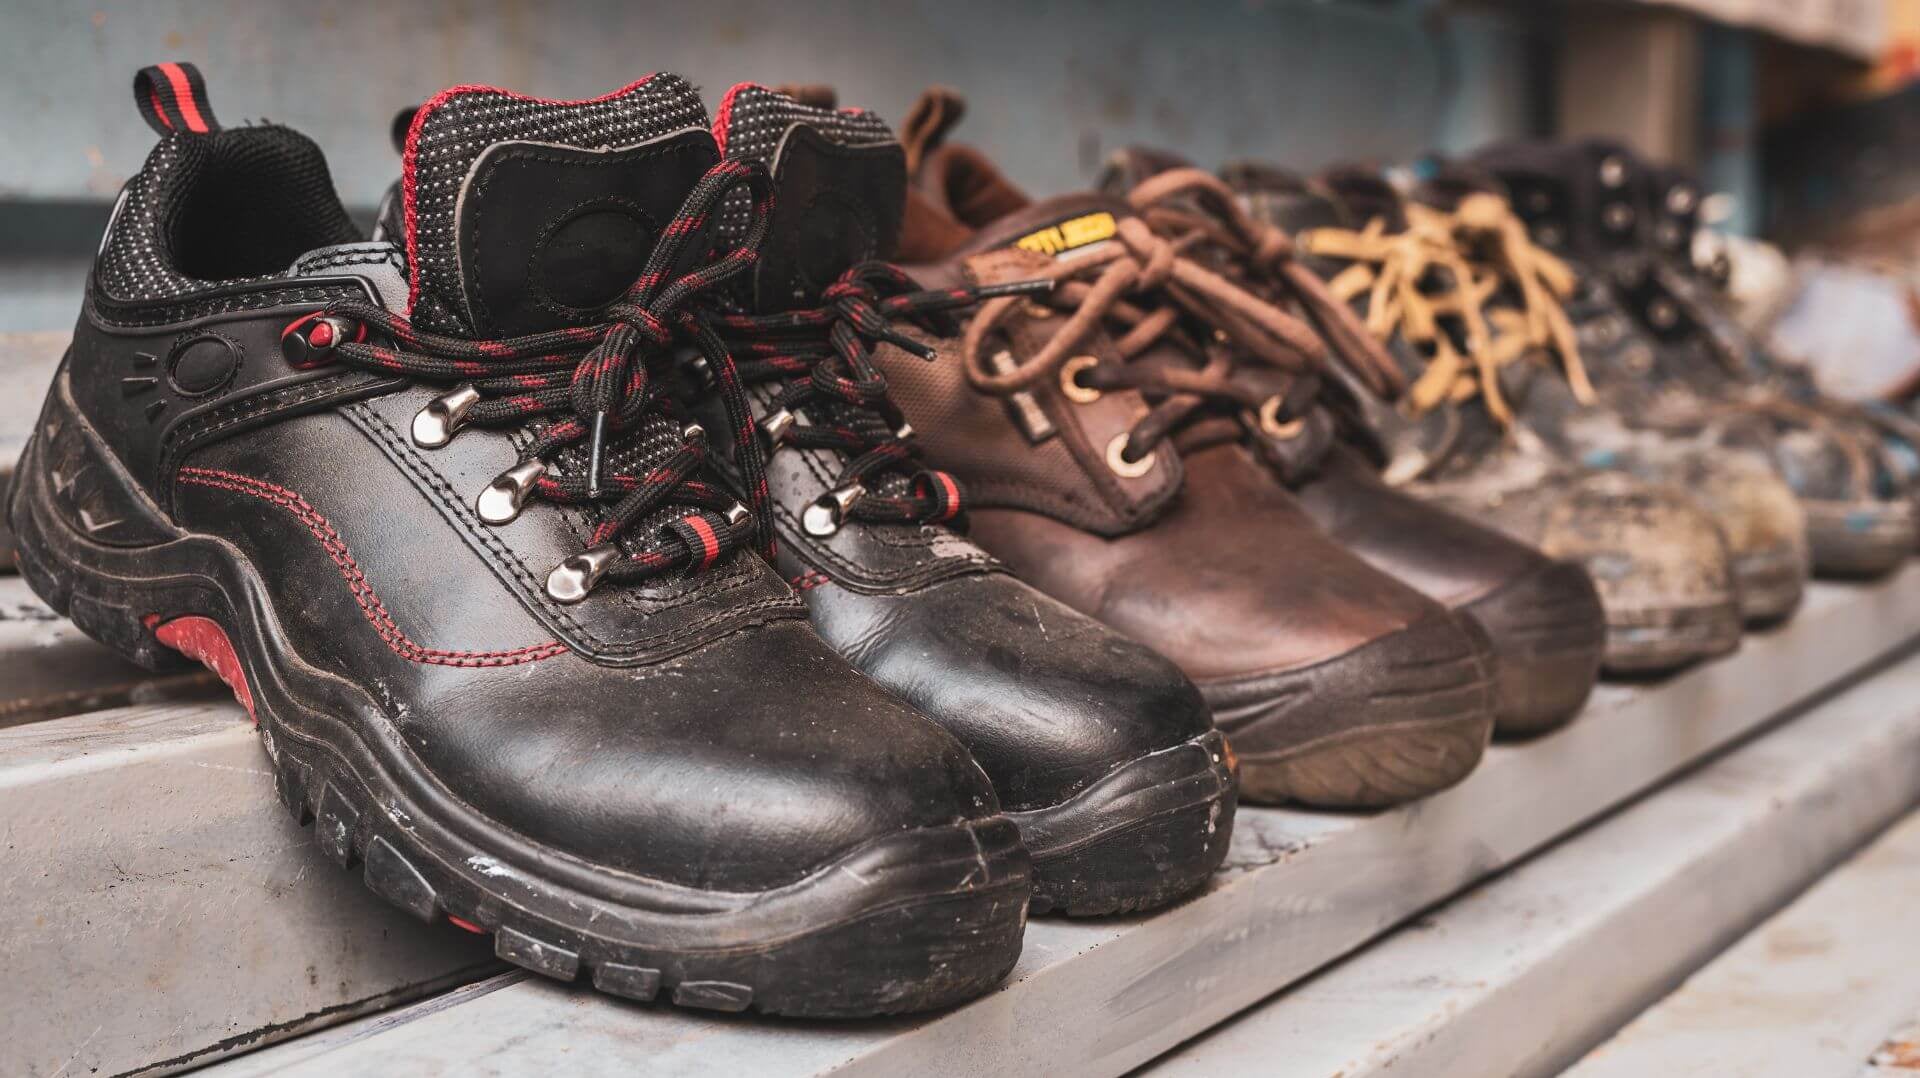 How to Choose the Right Steel Toe Shoes for Your Job